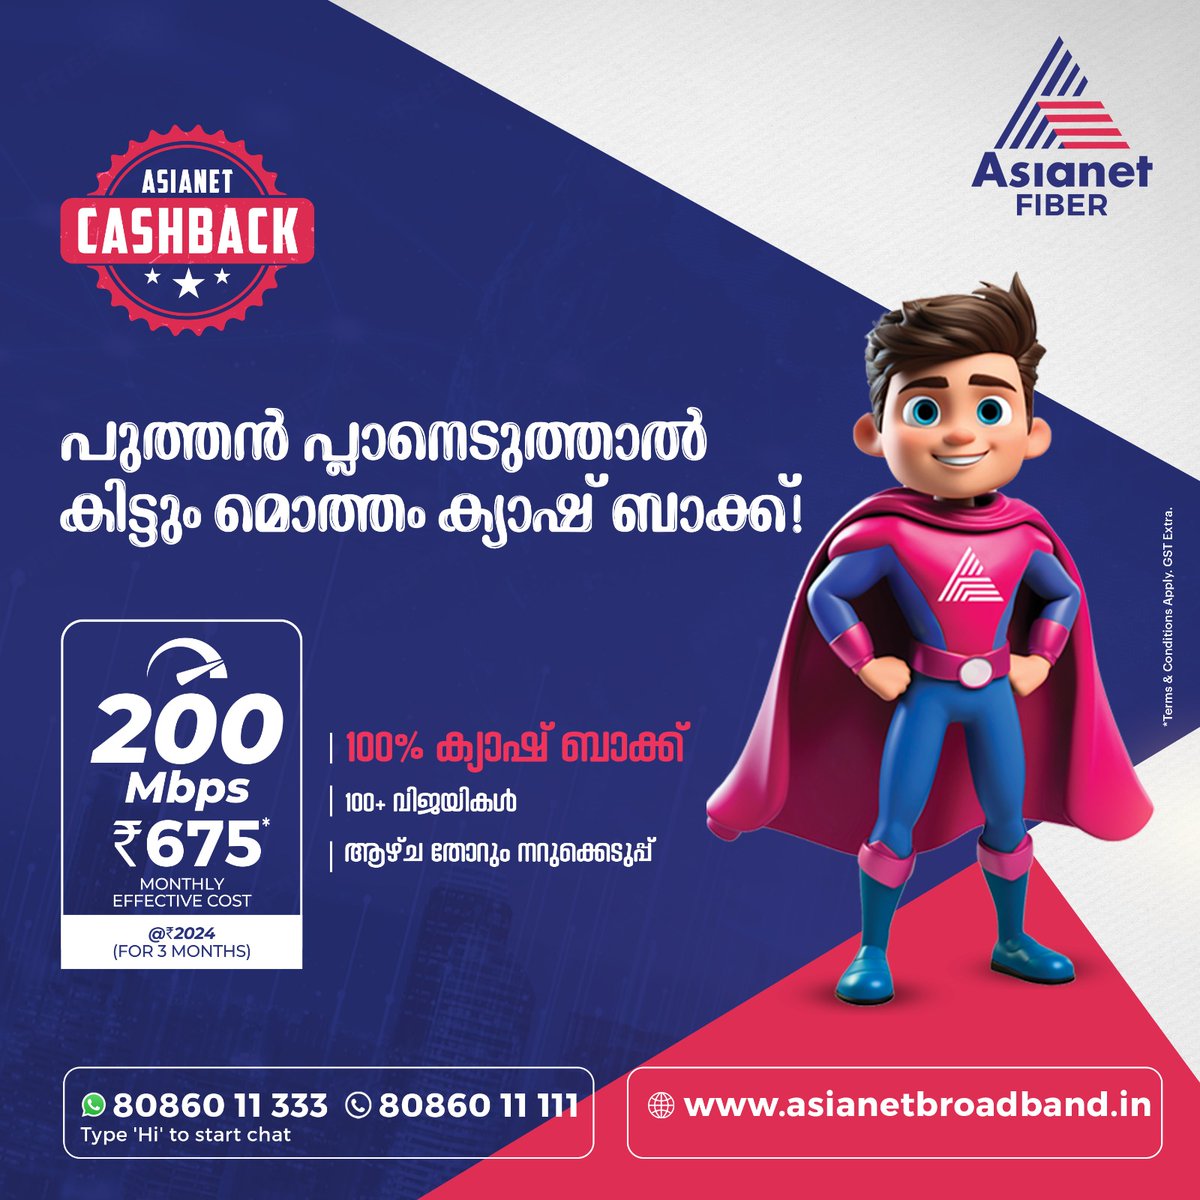 Experience 200 Mbps superspeed with Asianet Fiber! Sign up today for your chance to win 100% cashback.

Call: 9061228506 (Ernakulam)

#AsianetBroadband #AsianetFiber #HighSpeedInternet #Internet